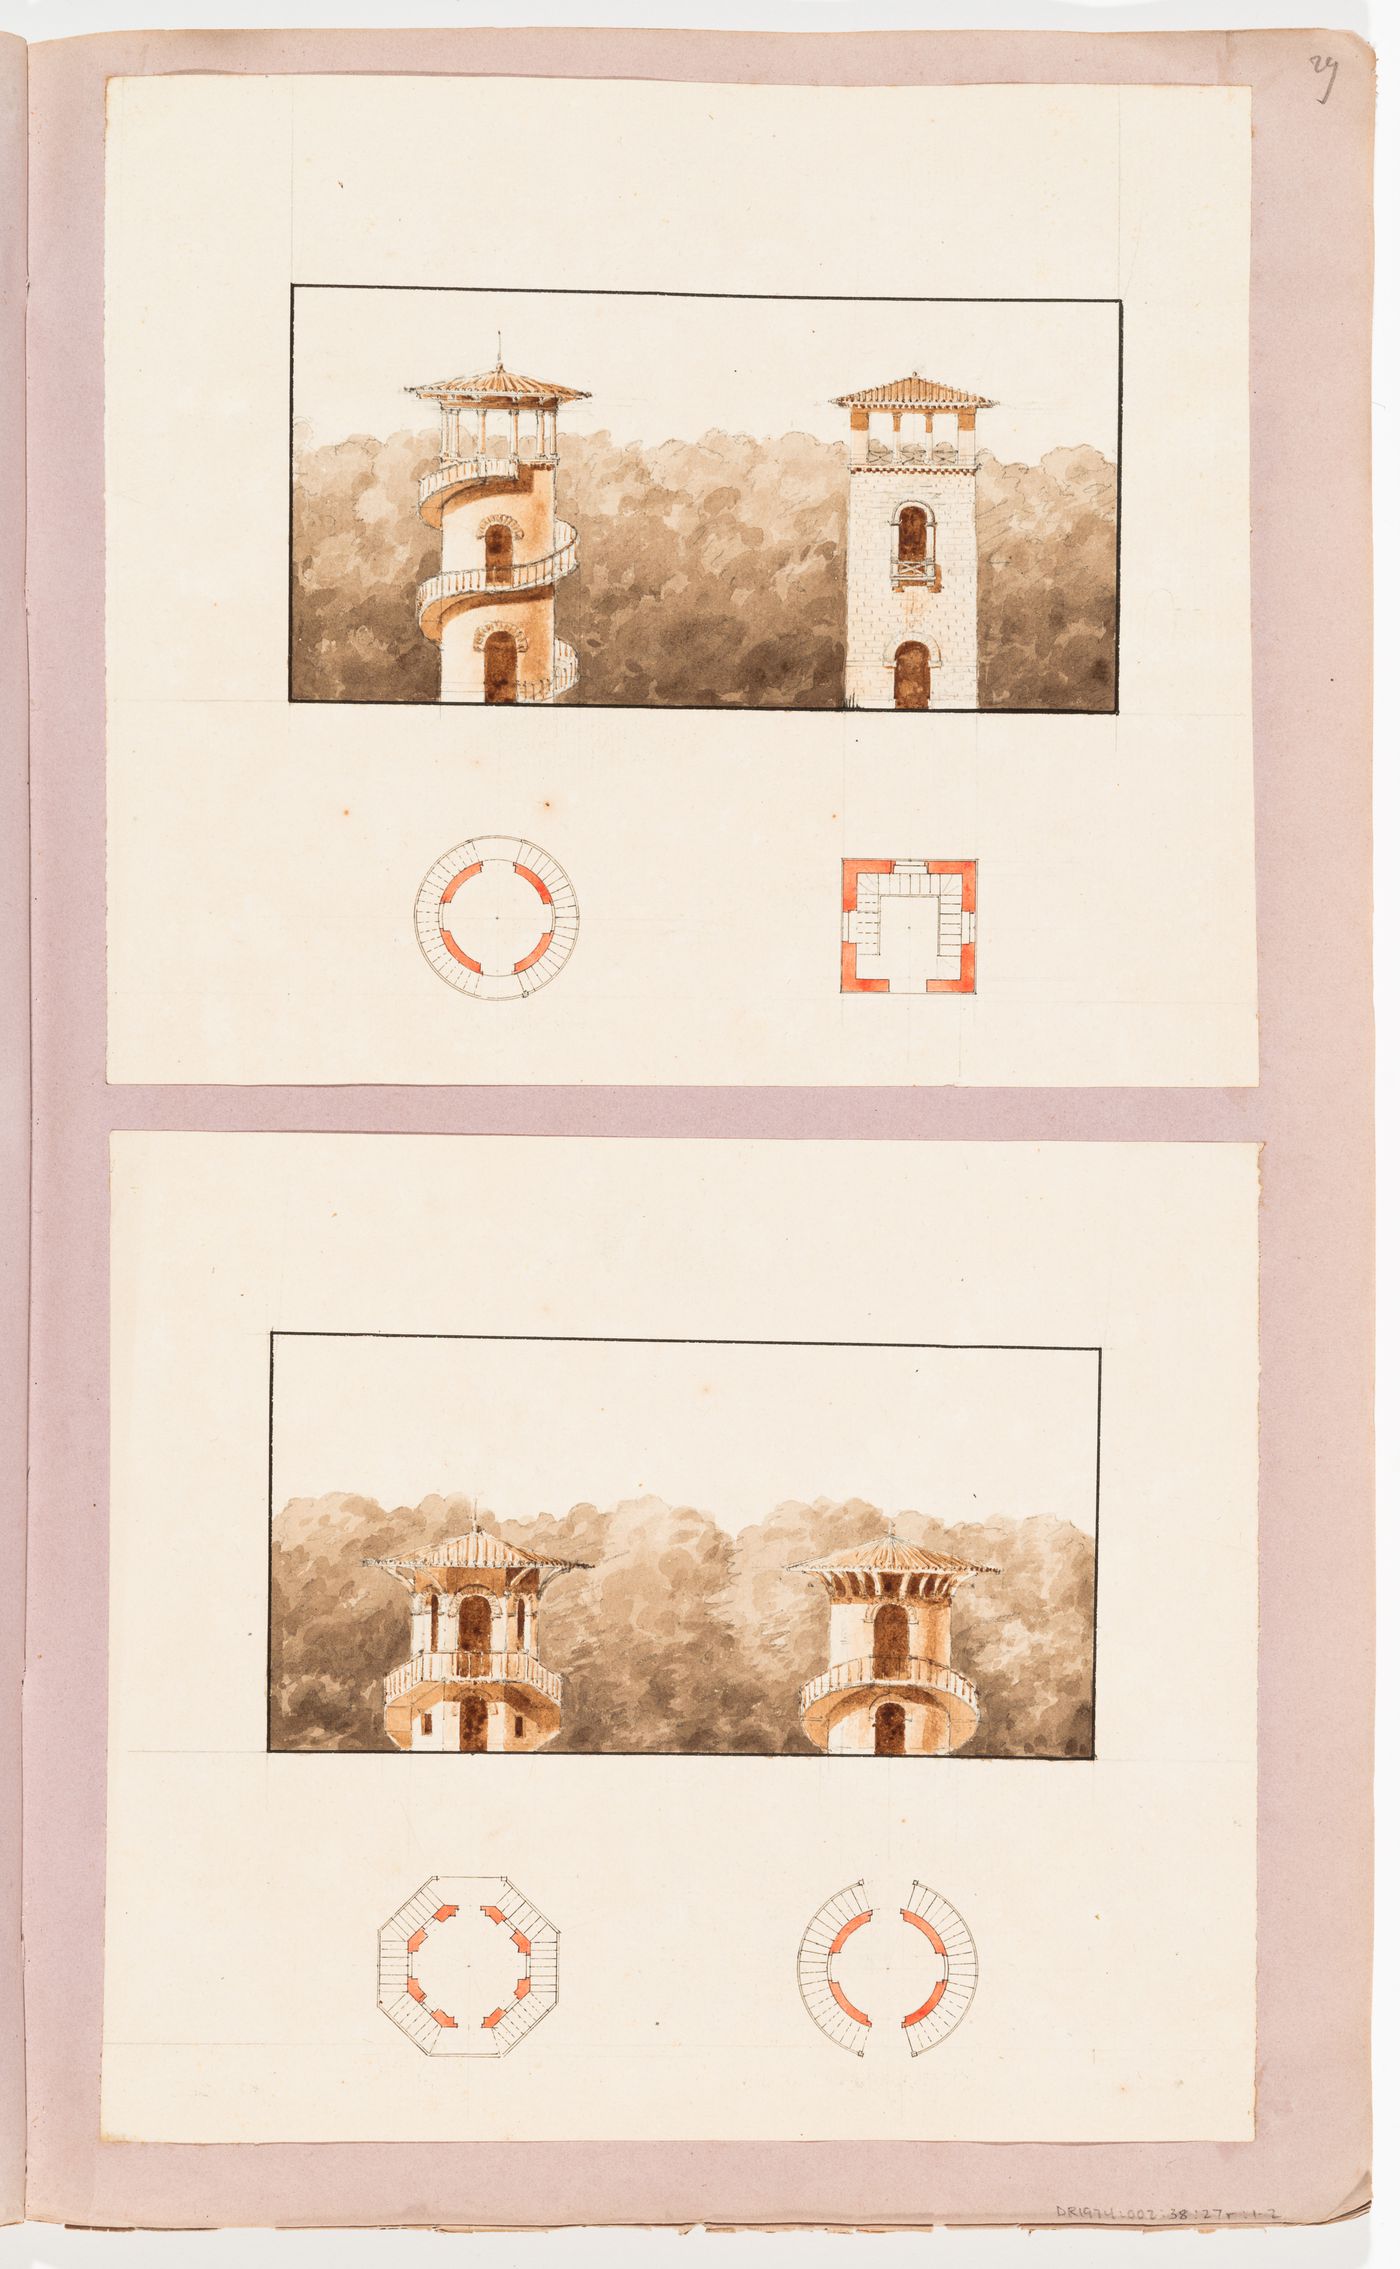 Elevations and plans for four Chinese-inspired garden pavilions; verso: Partial sketch plan for a country house with a circular salon